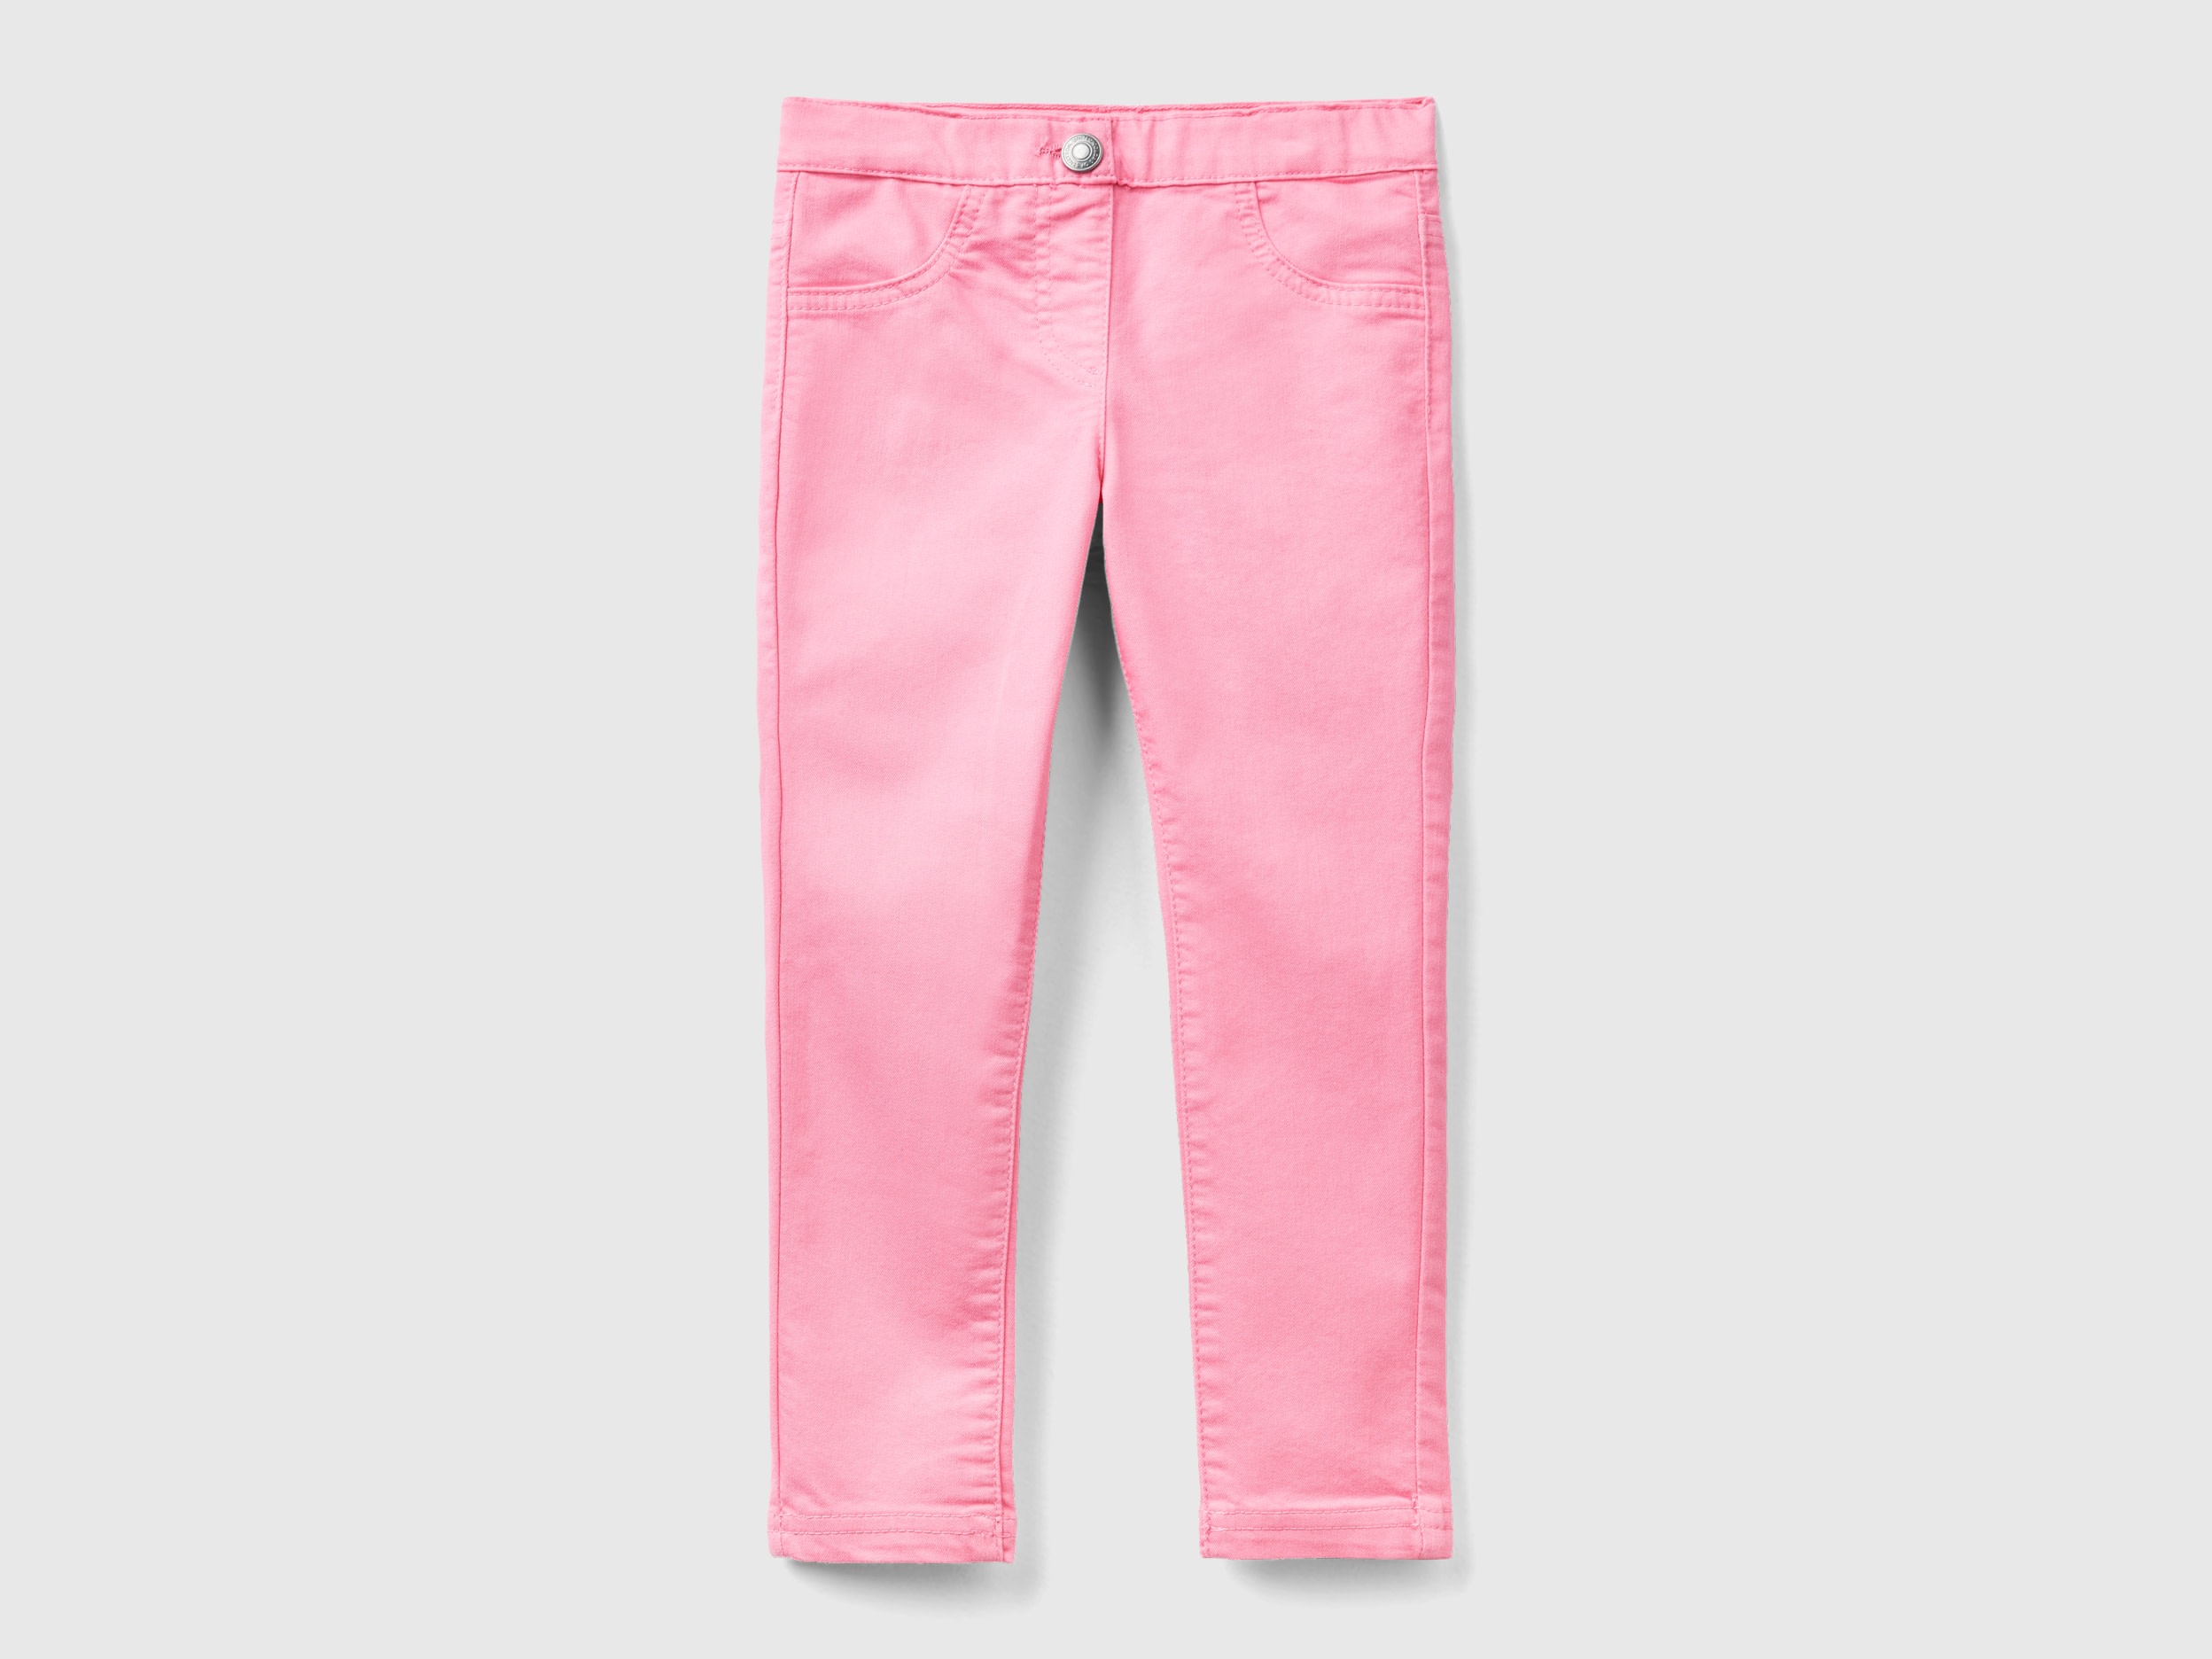 Benetton, Jeggings In Stretch Cotton Blend, size 2-3, Pink, Kids